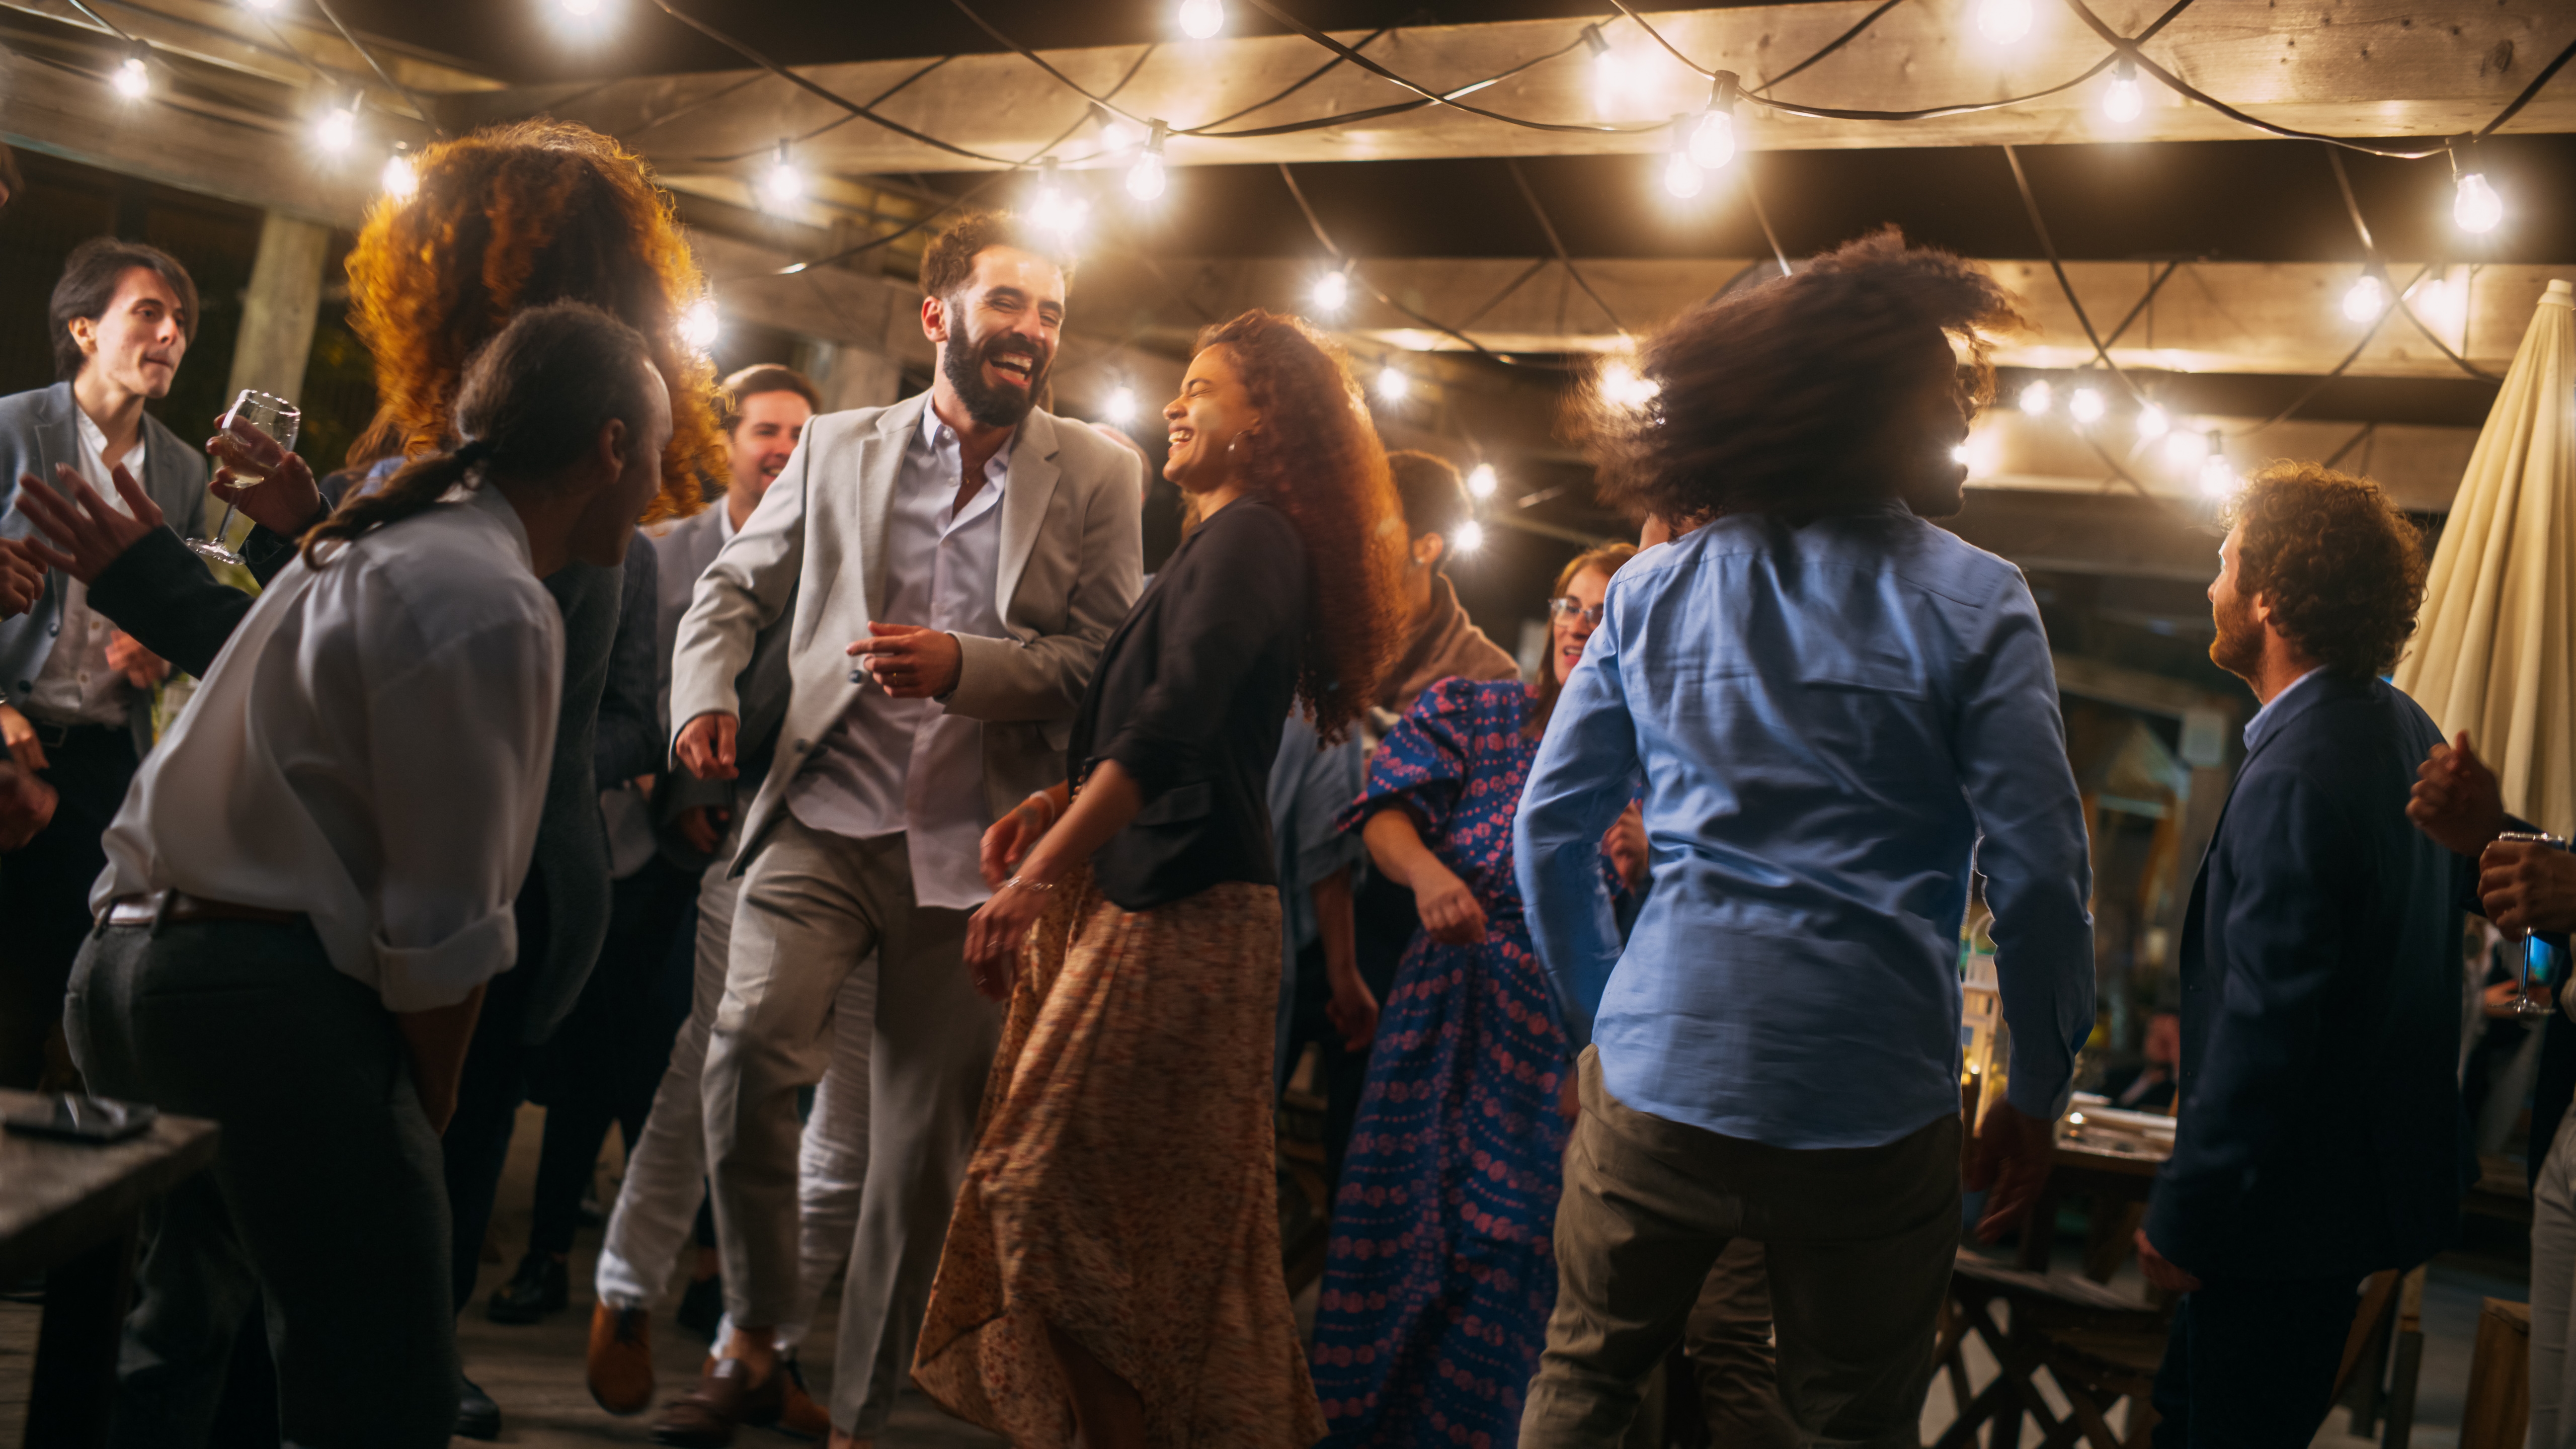 People are seen dancing together at a wedding reception | Source: Shutterstock